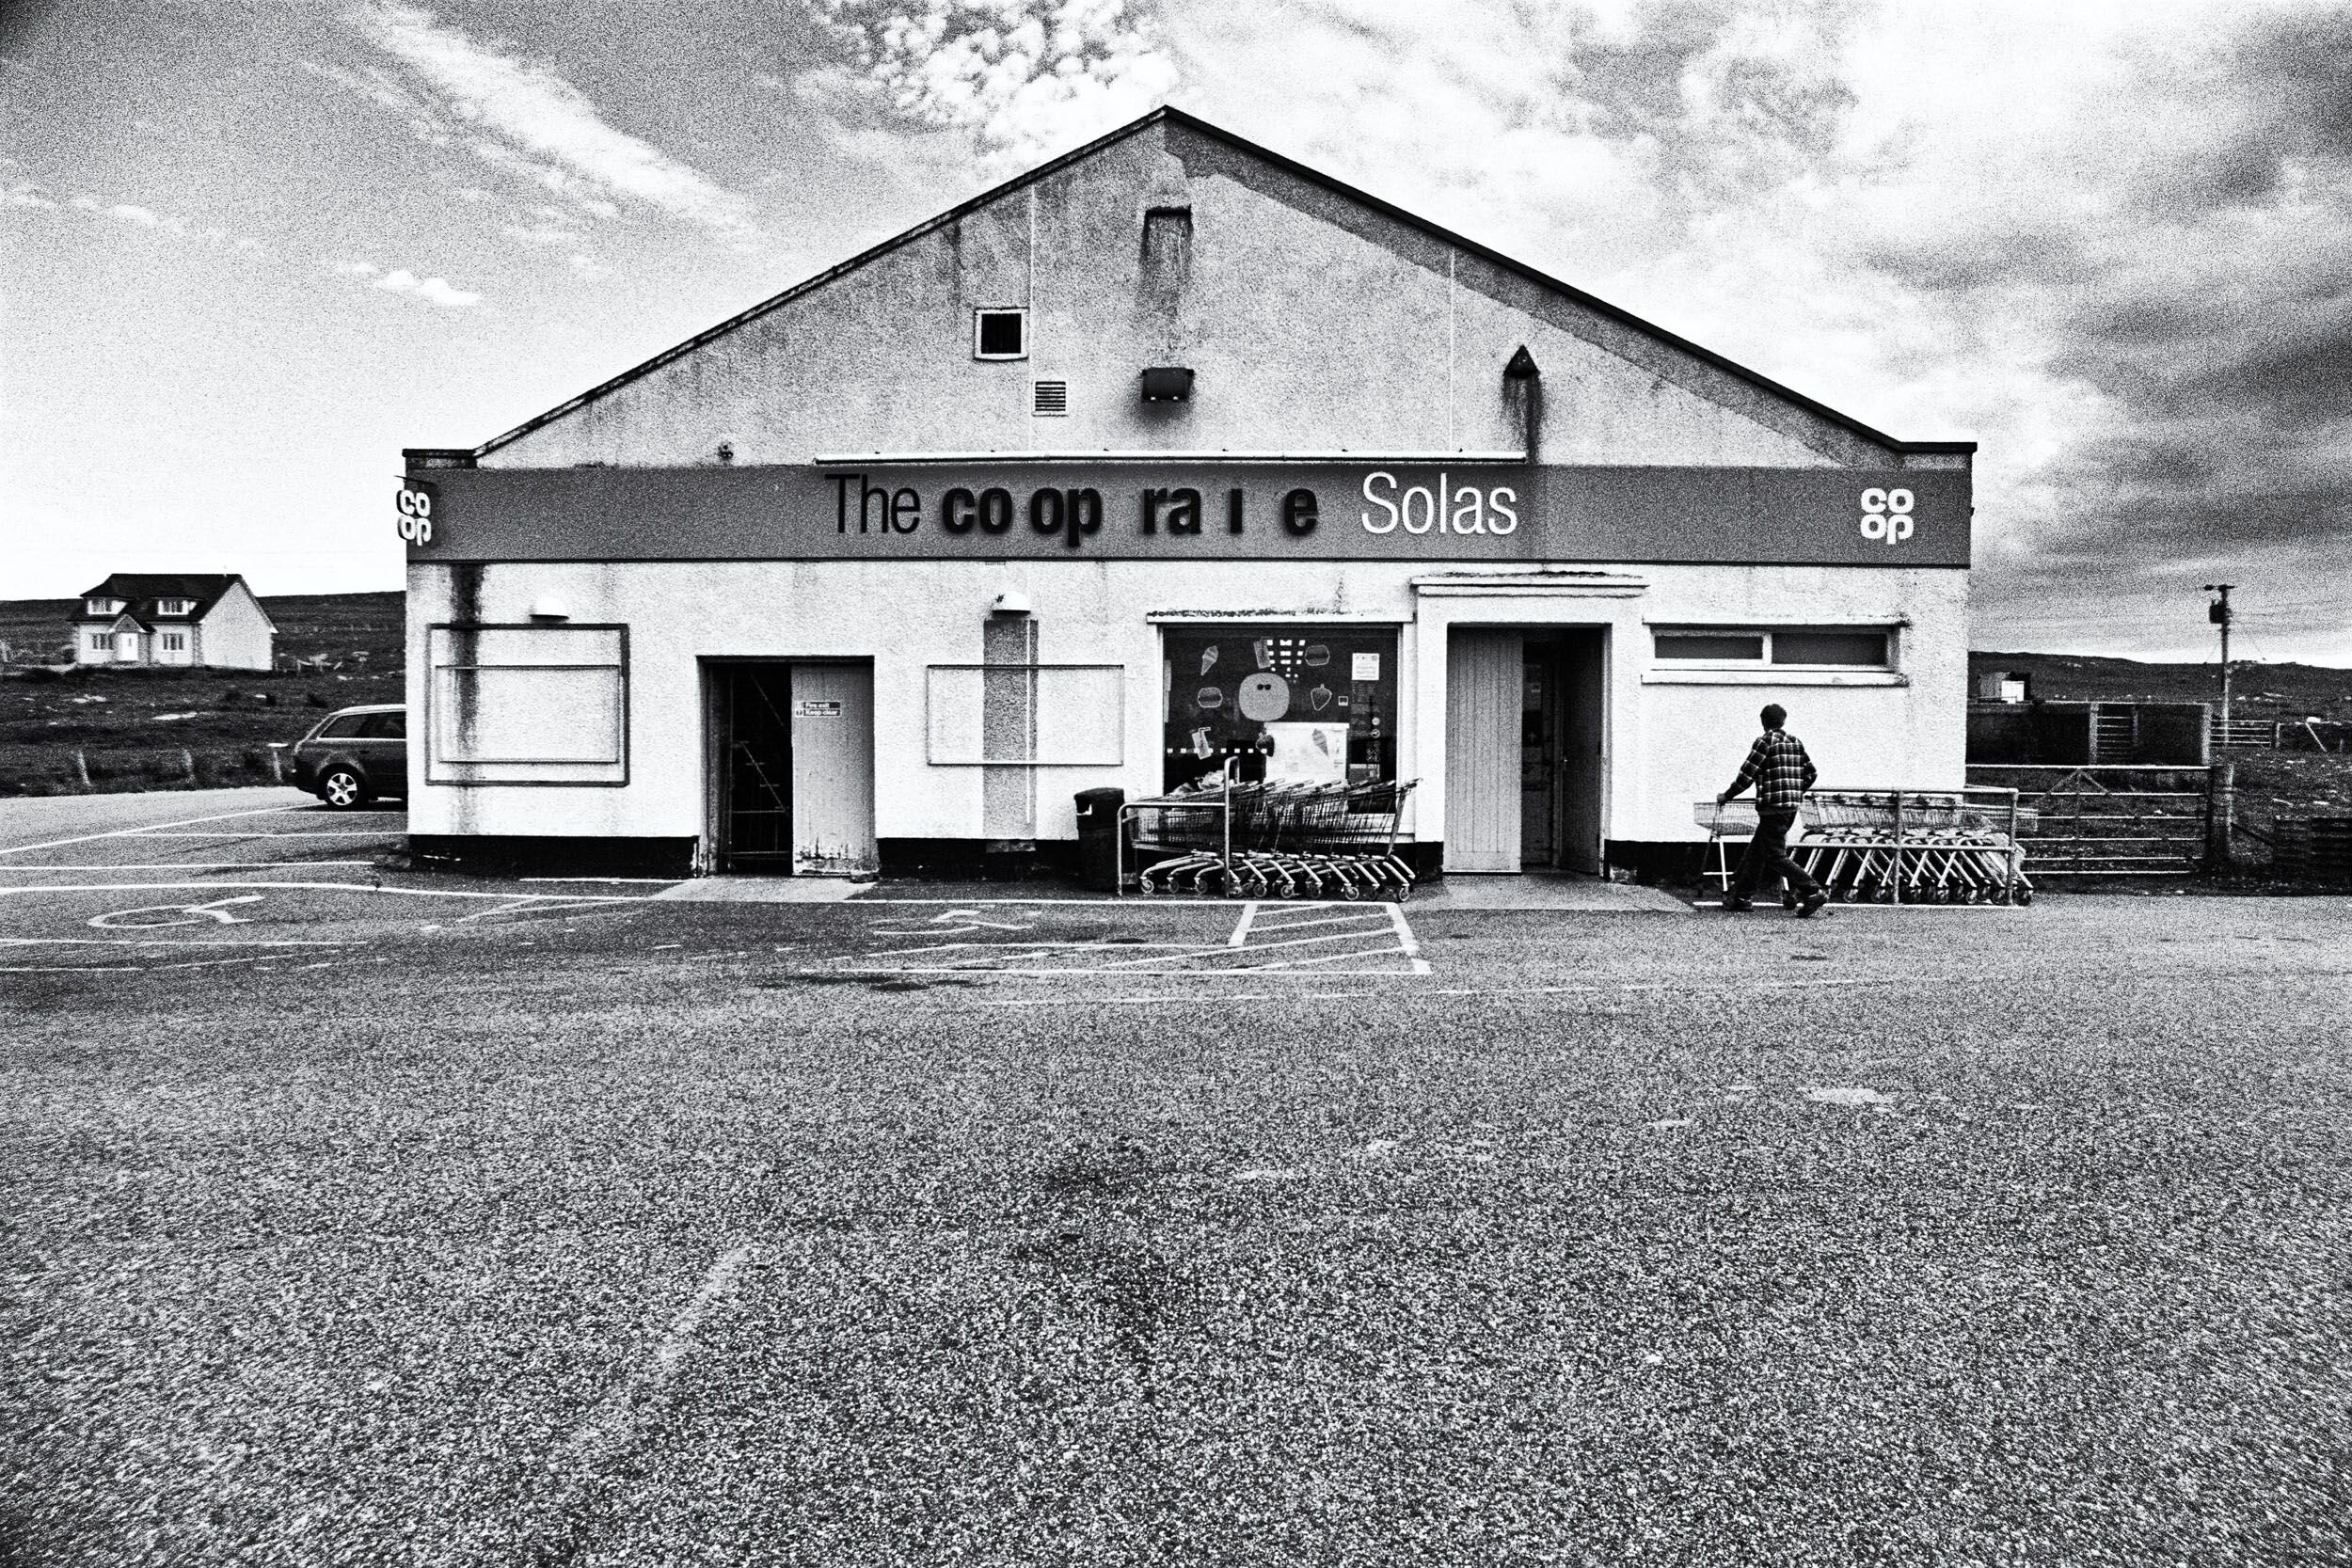  The Cooperative Shop, Sollas, North Uist, 2019 